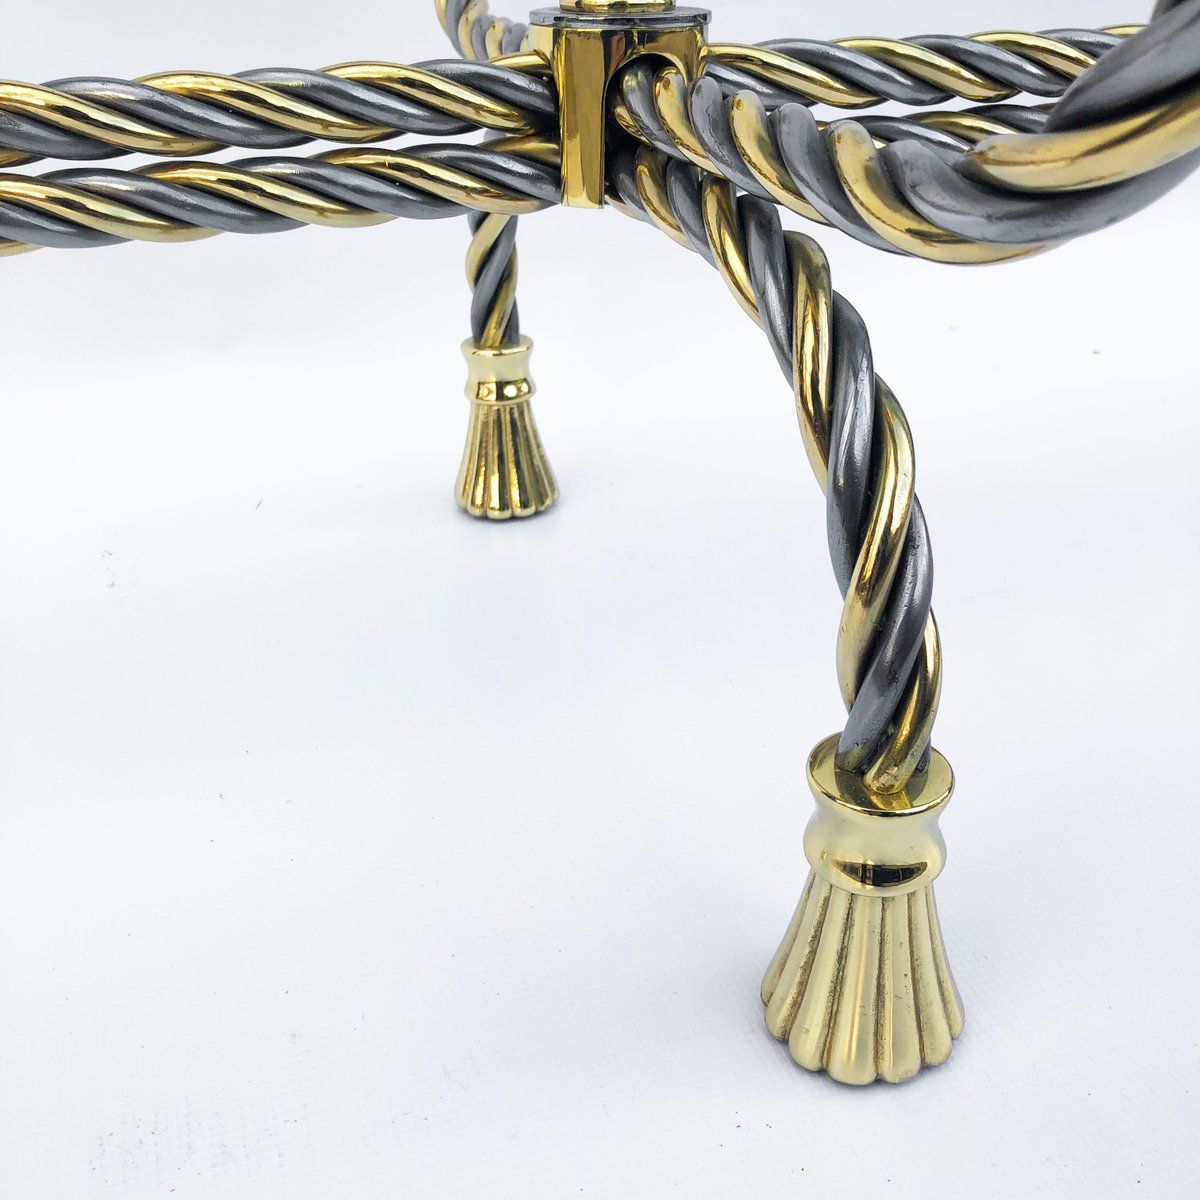 Widely Used Oval Corn Straw Rope Coffee Tables Intended For Brass Chrome Twisted Rope Oval Coffee Table, 1970s For (View 11 of 20)